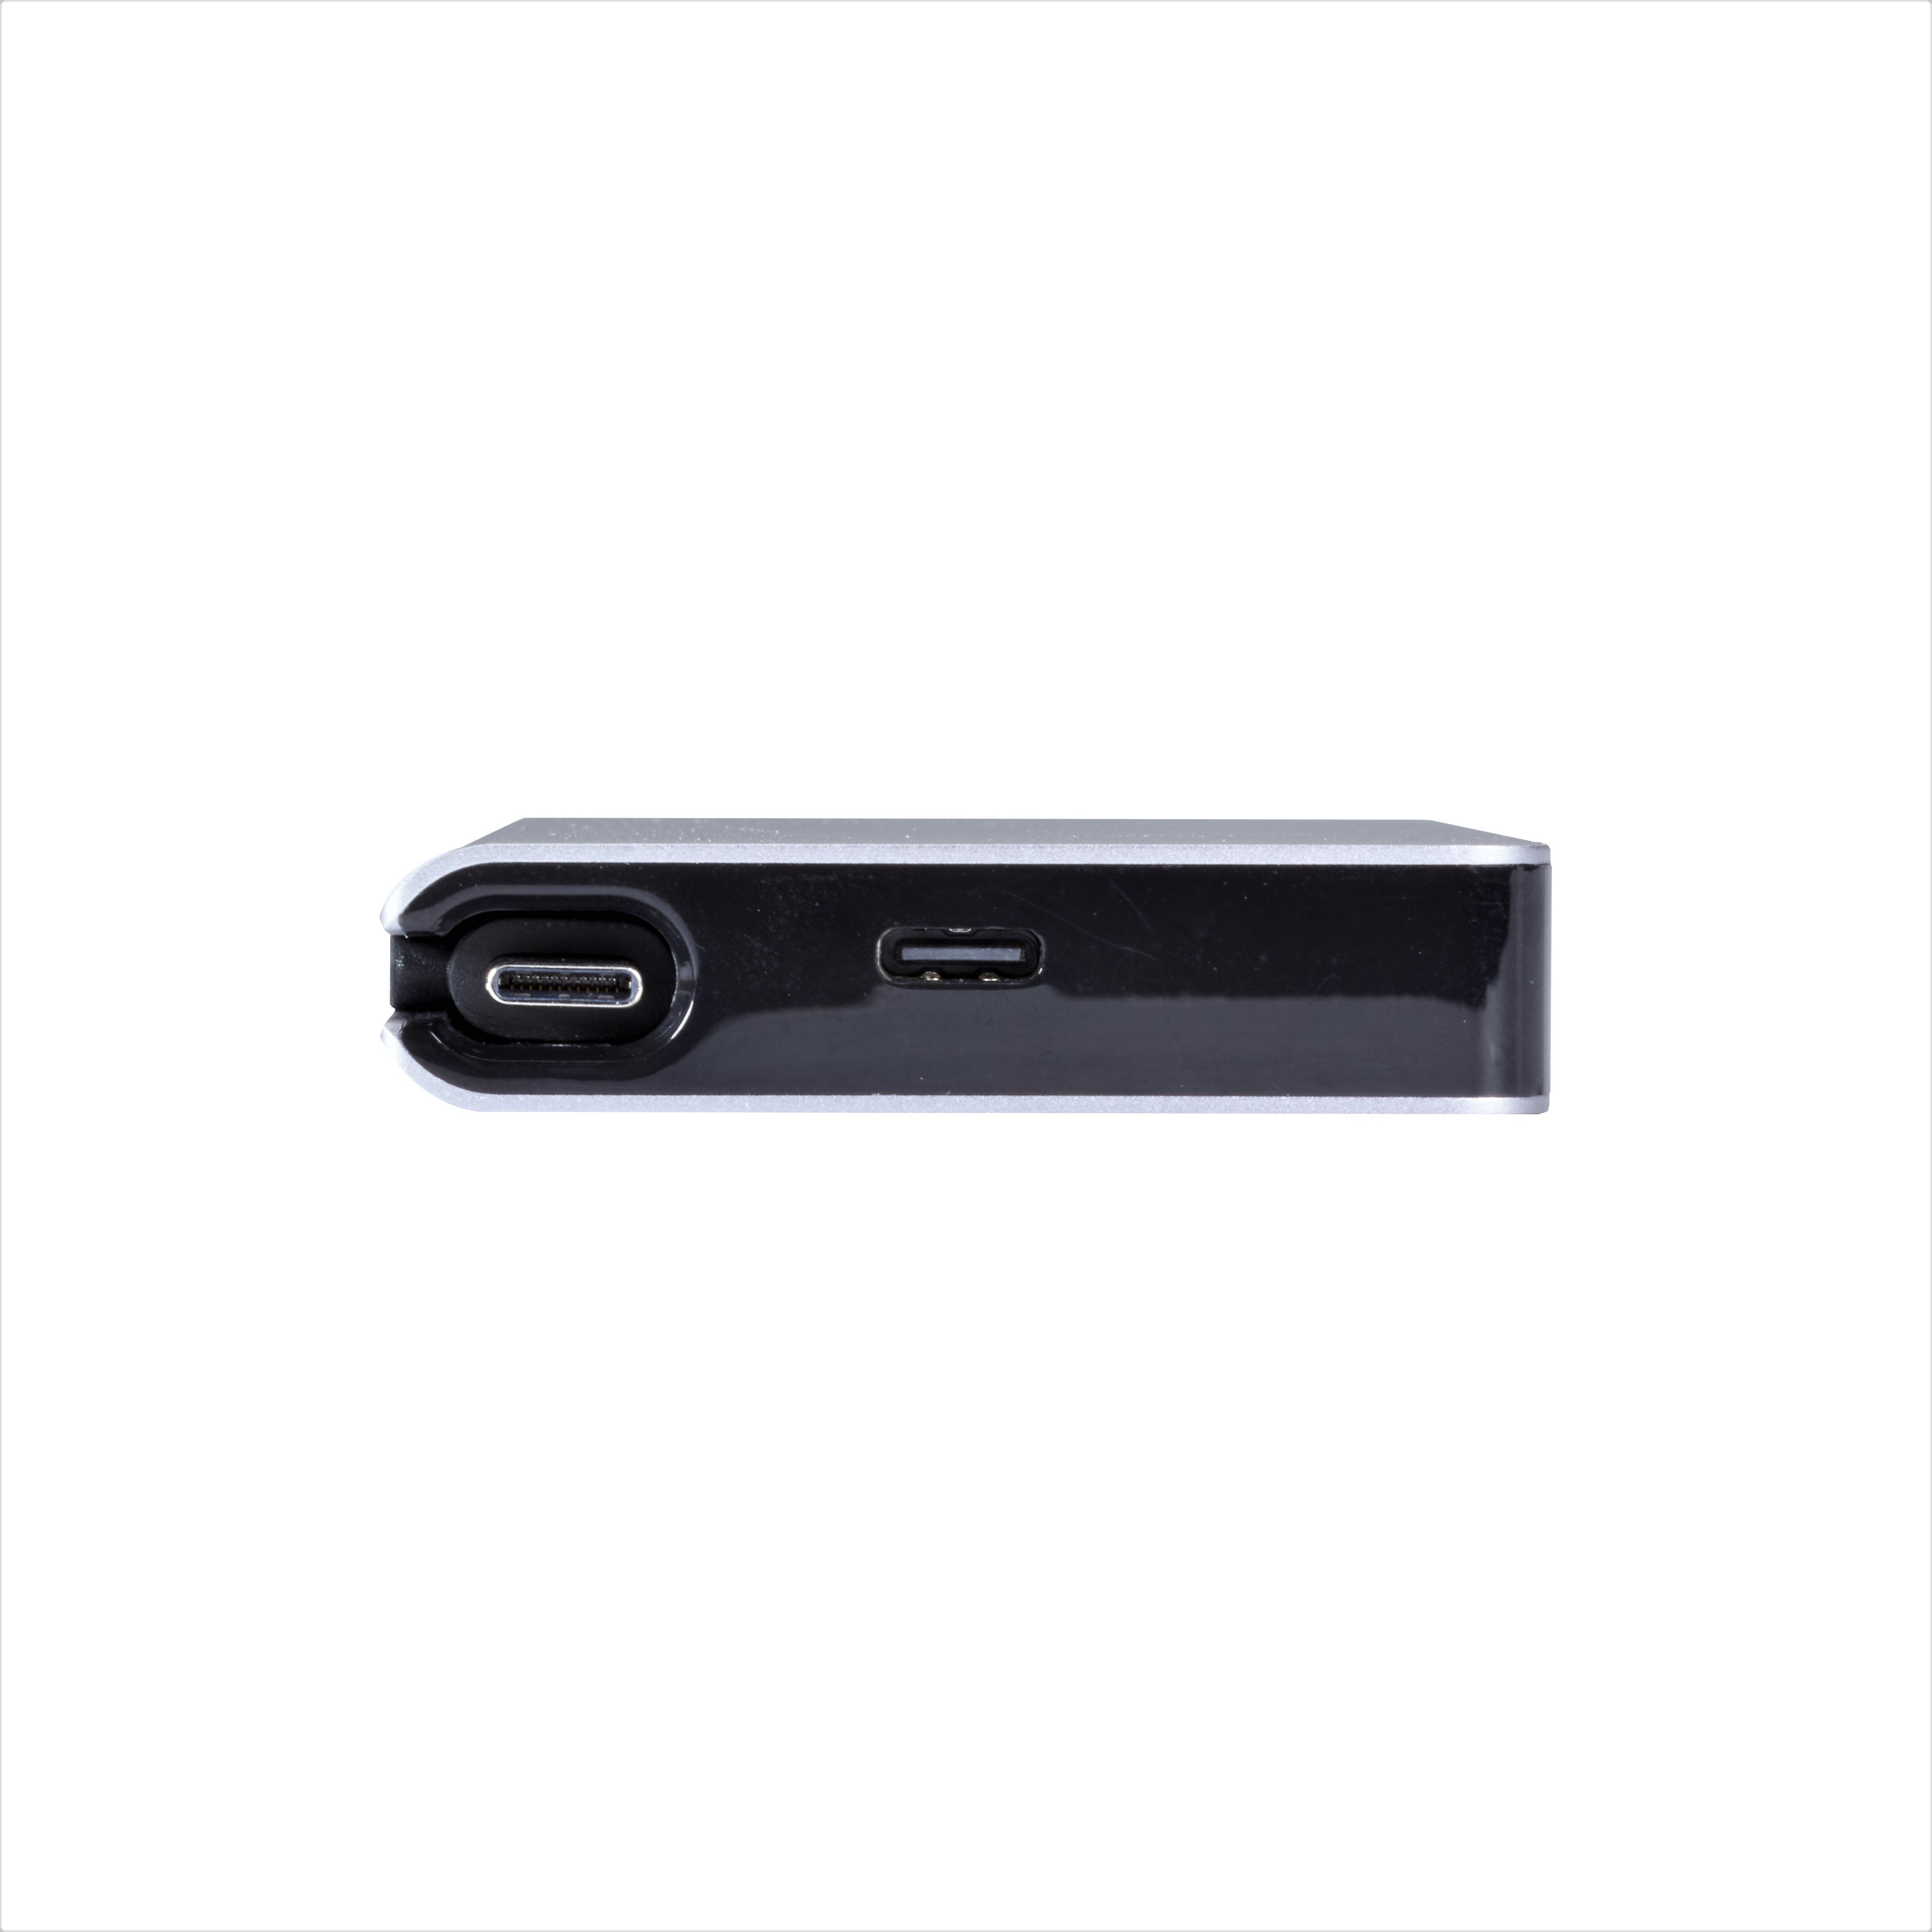 Black Box USB C Docking Station in a Side View